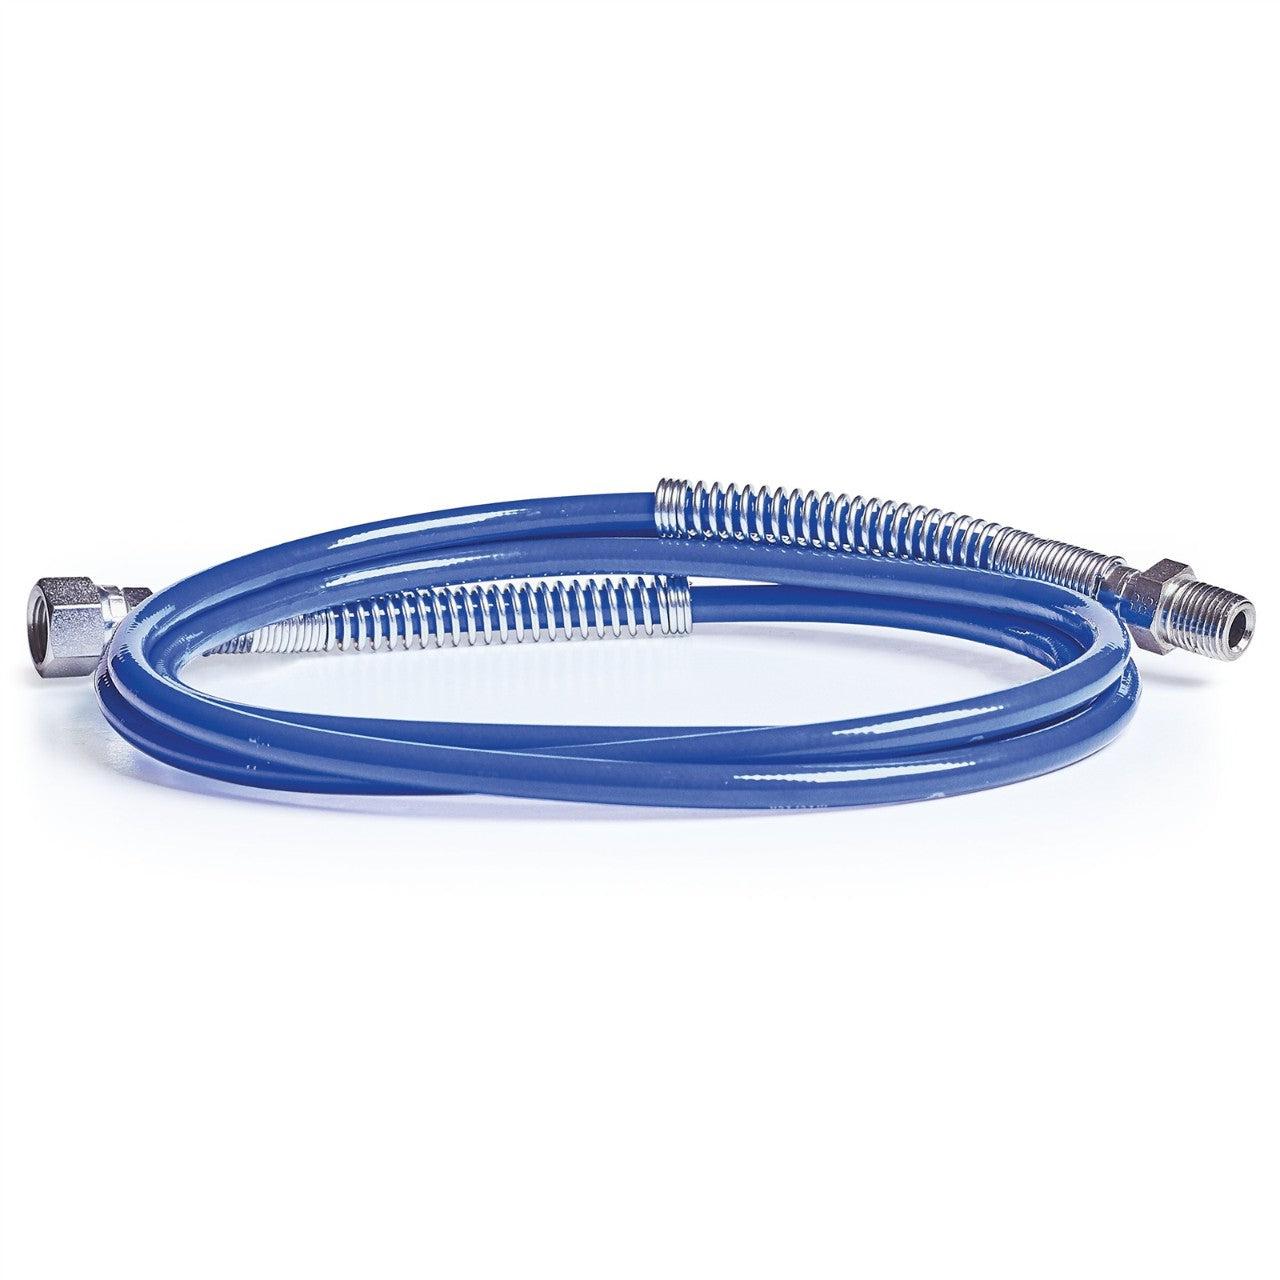 BlueMax II Airless Whip Hose, 1/8 in x 6 ft